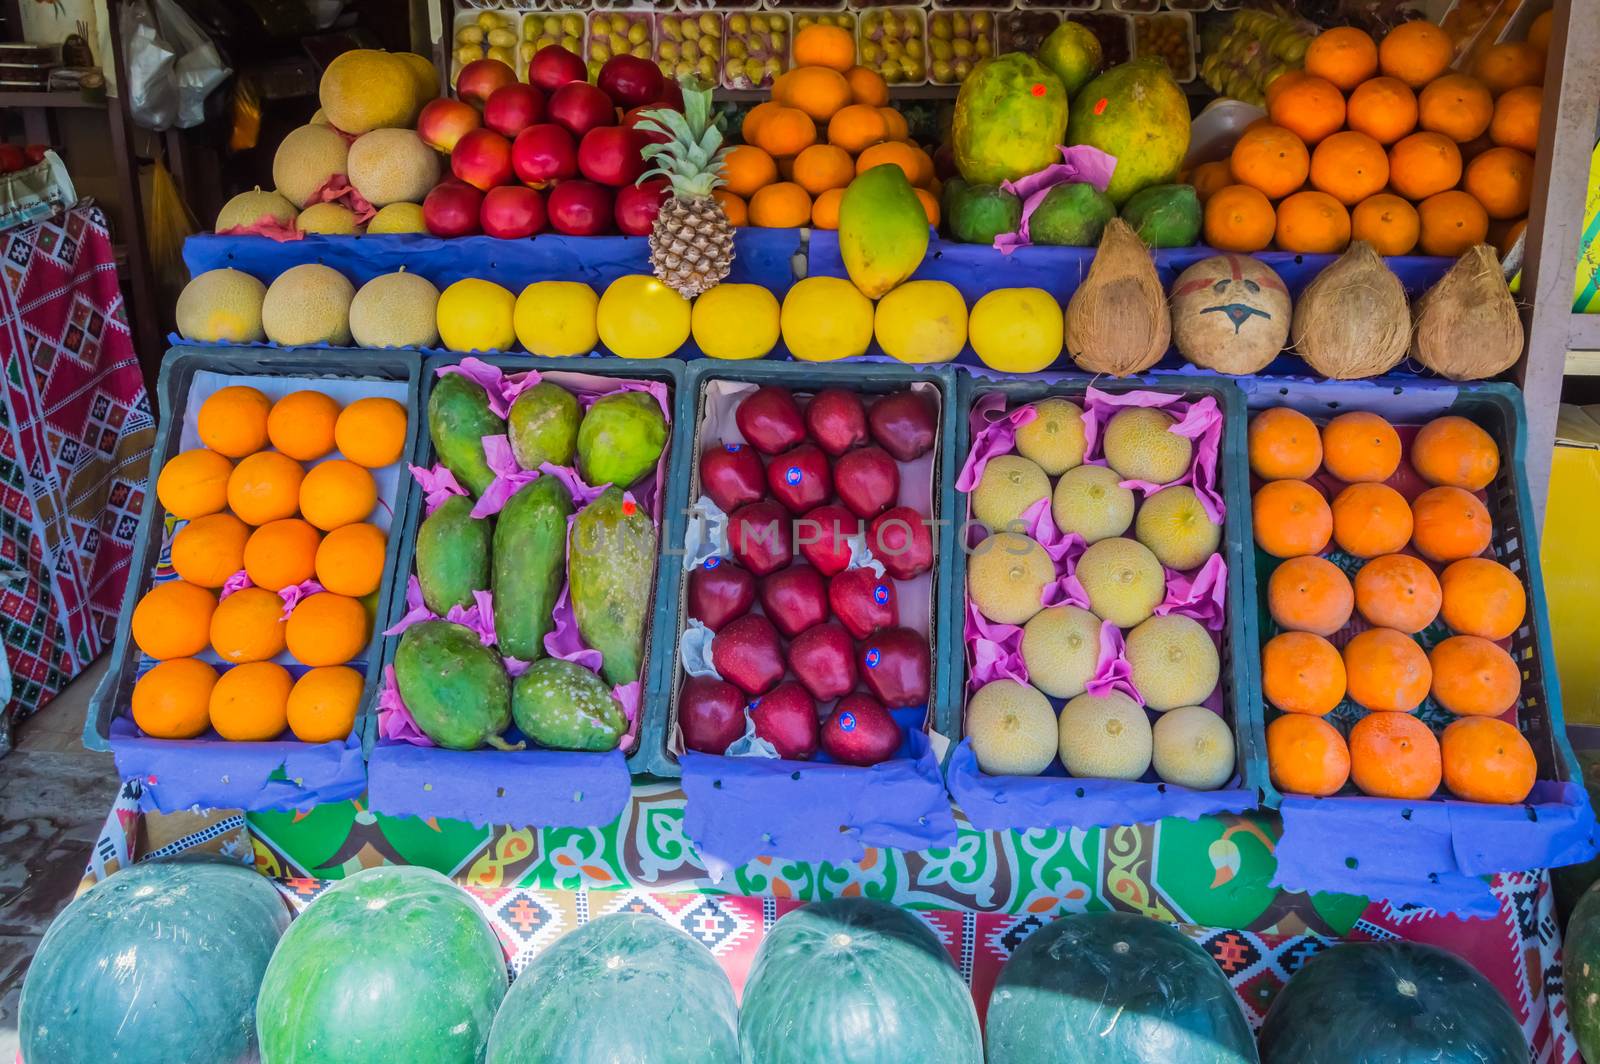 Display of fruits in a shop  by Philou1000